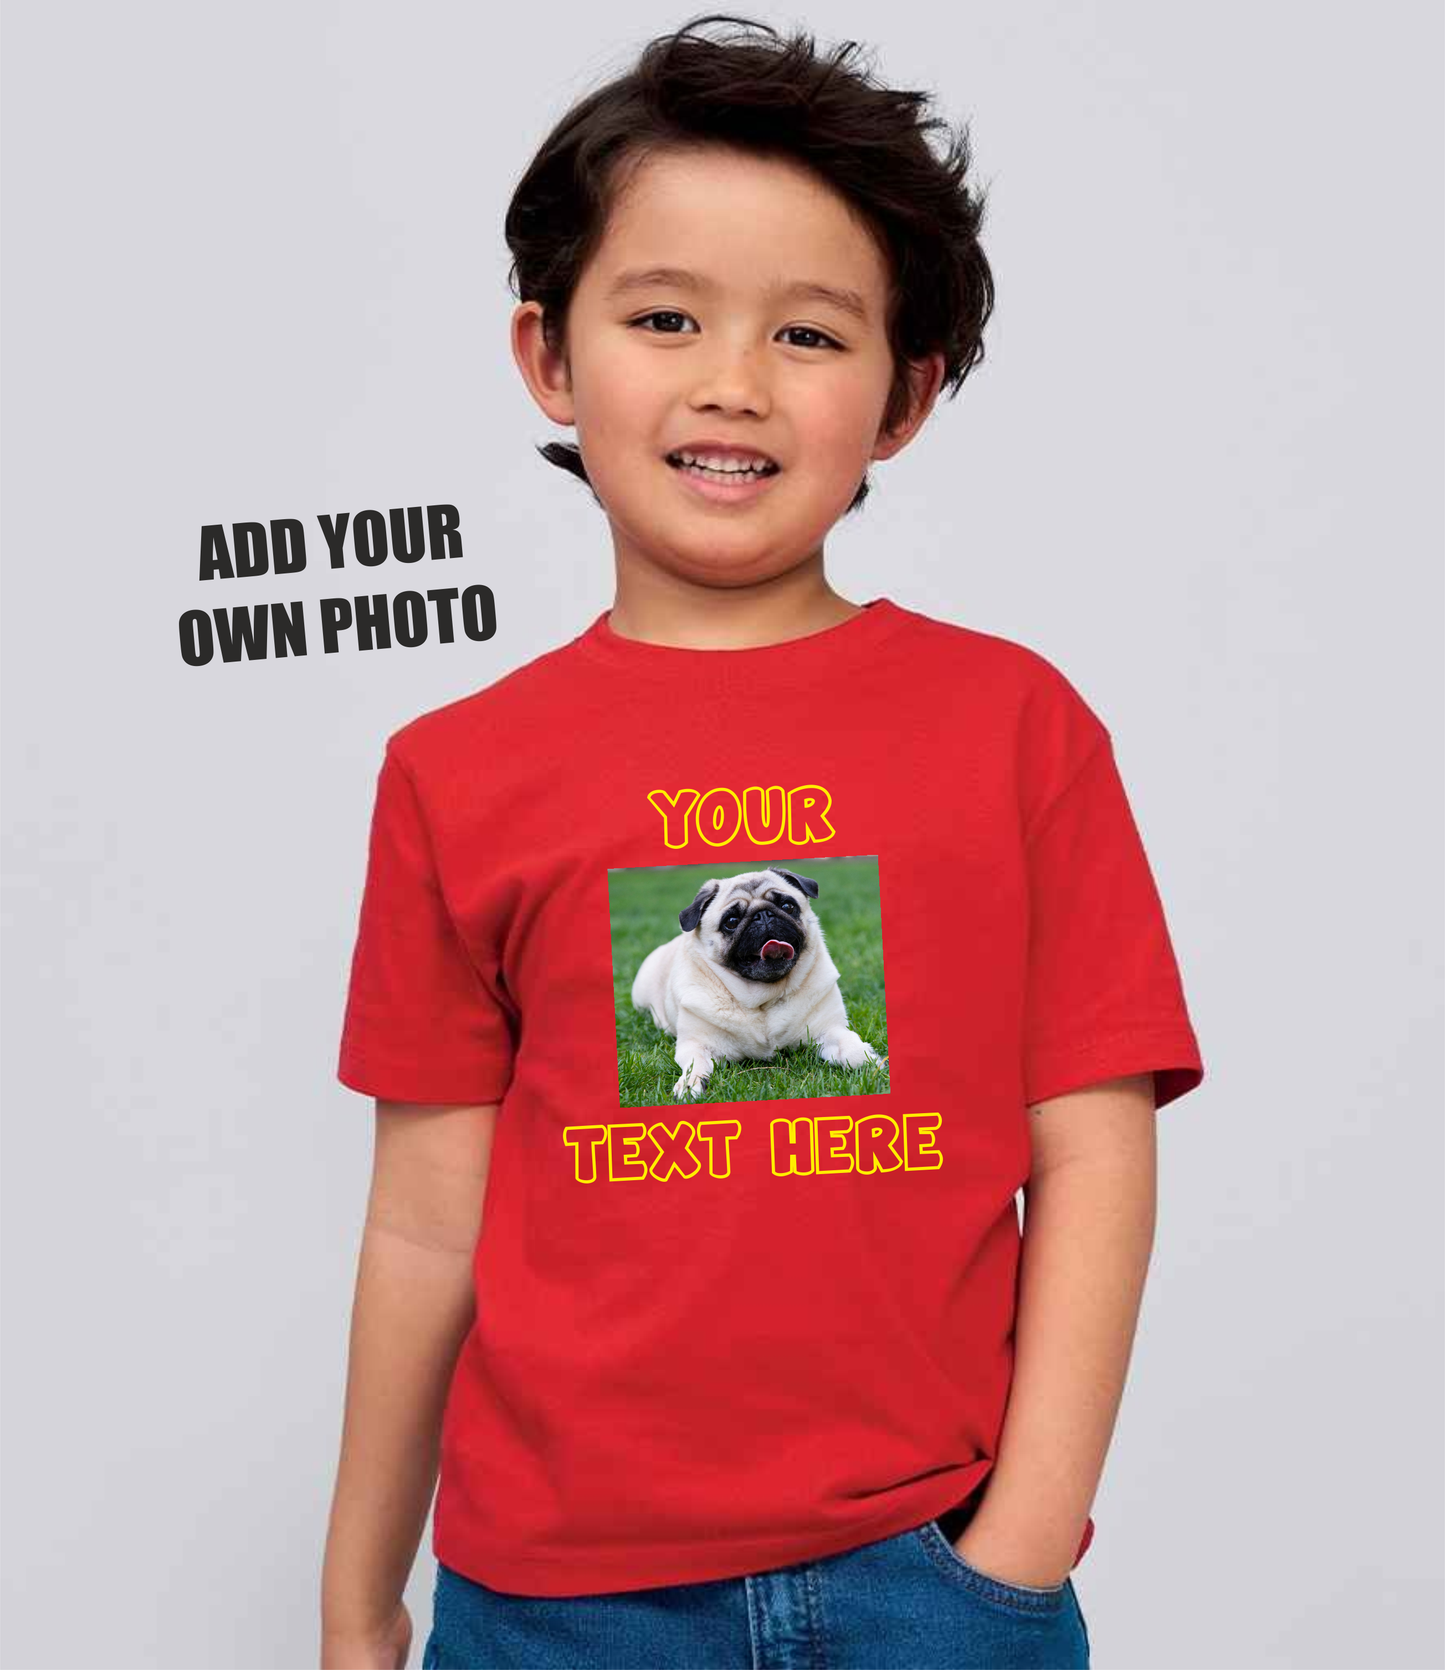 Personalised Kid's T-Shirt (Photo Upload with Text)